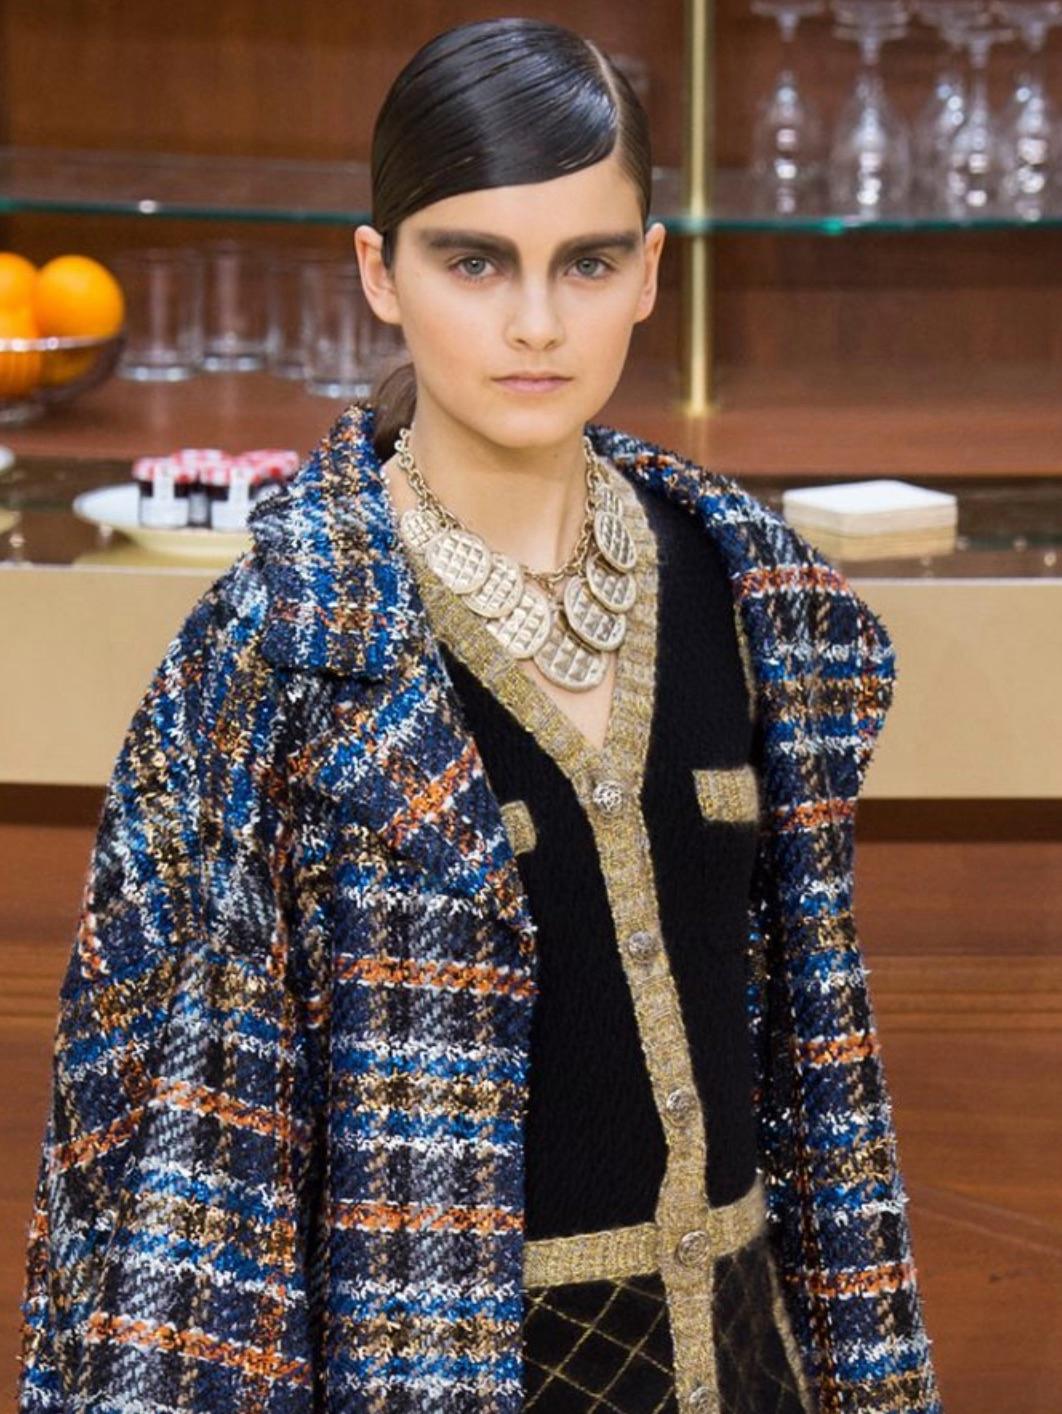 Chanel’s 2015 Fall/Winter collection featured a highly covetable, black and gold silk-cashmere blend cardigan that immediately became one of the most sought-after pieces. Adorned with stunning gold and lucite camellia buttons, this V-neck, quilted